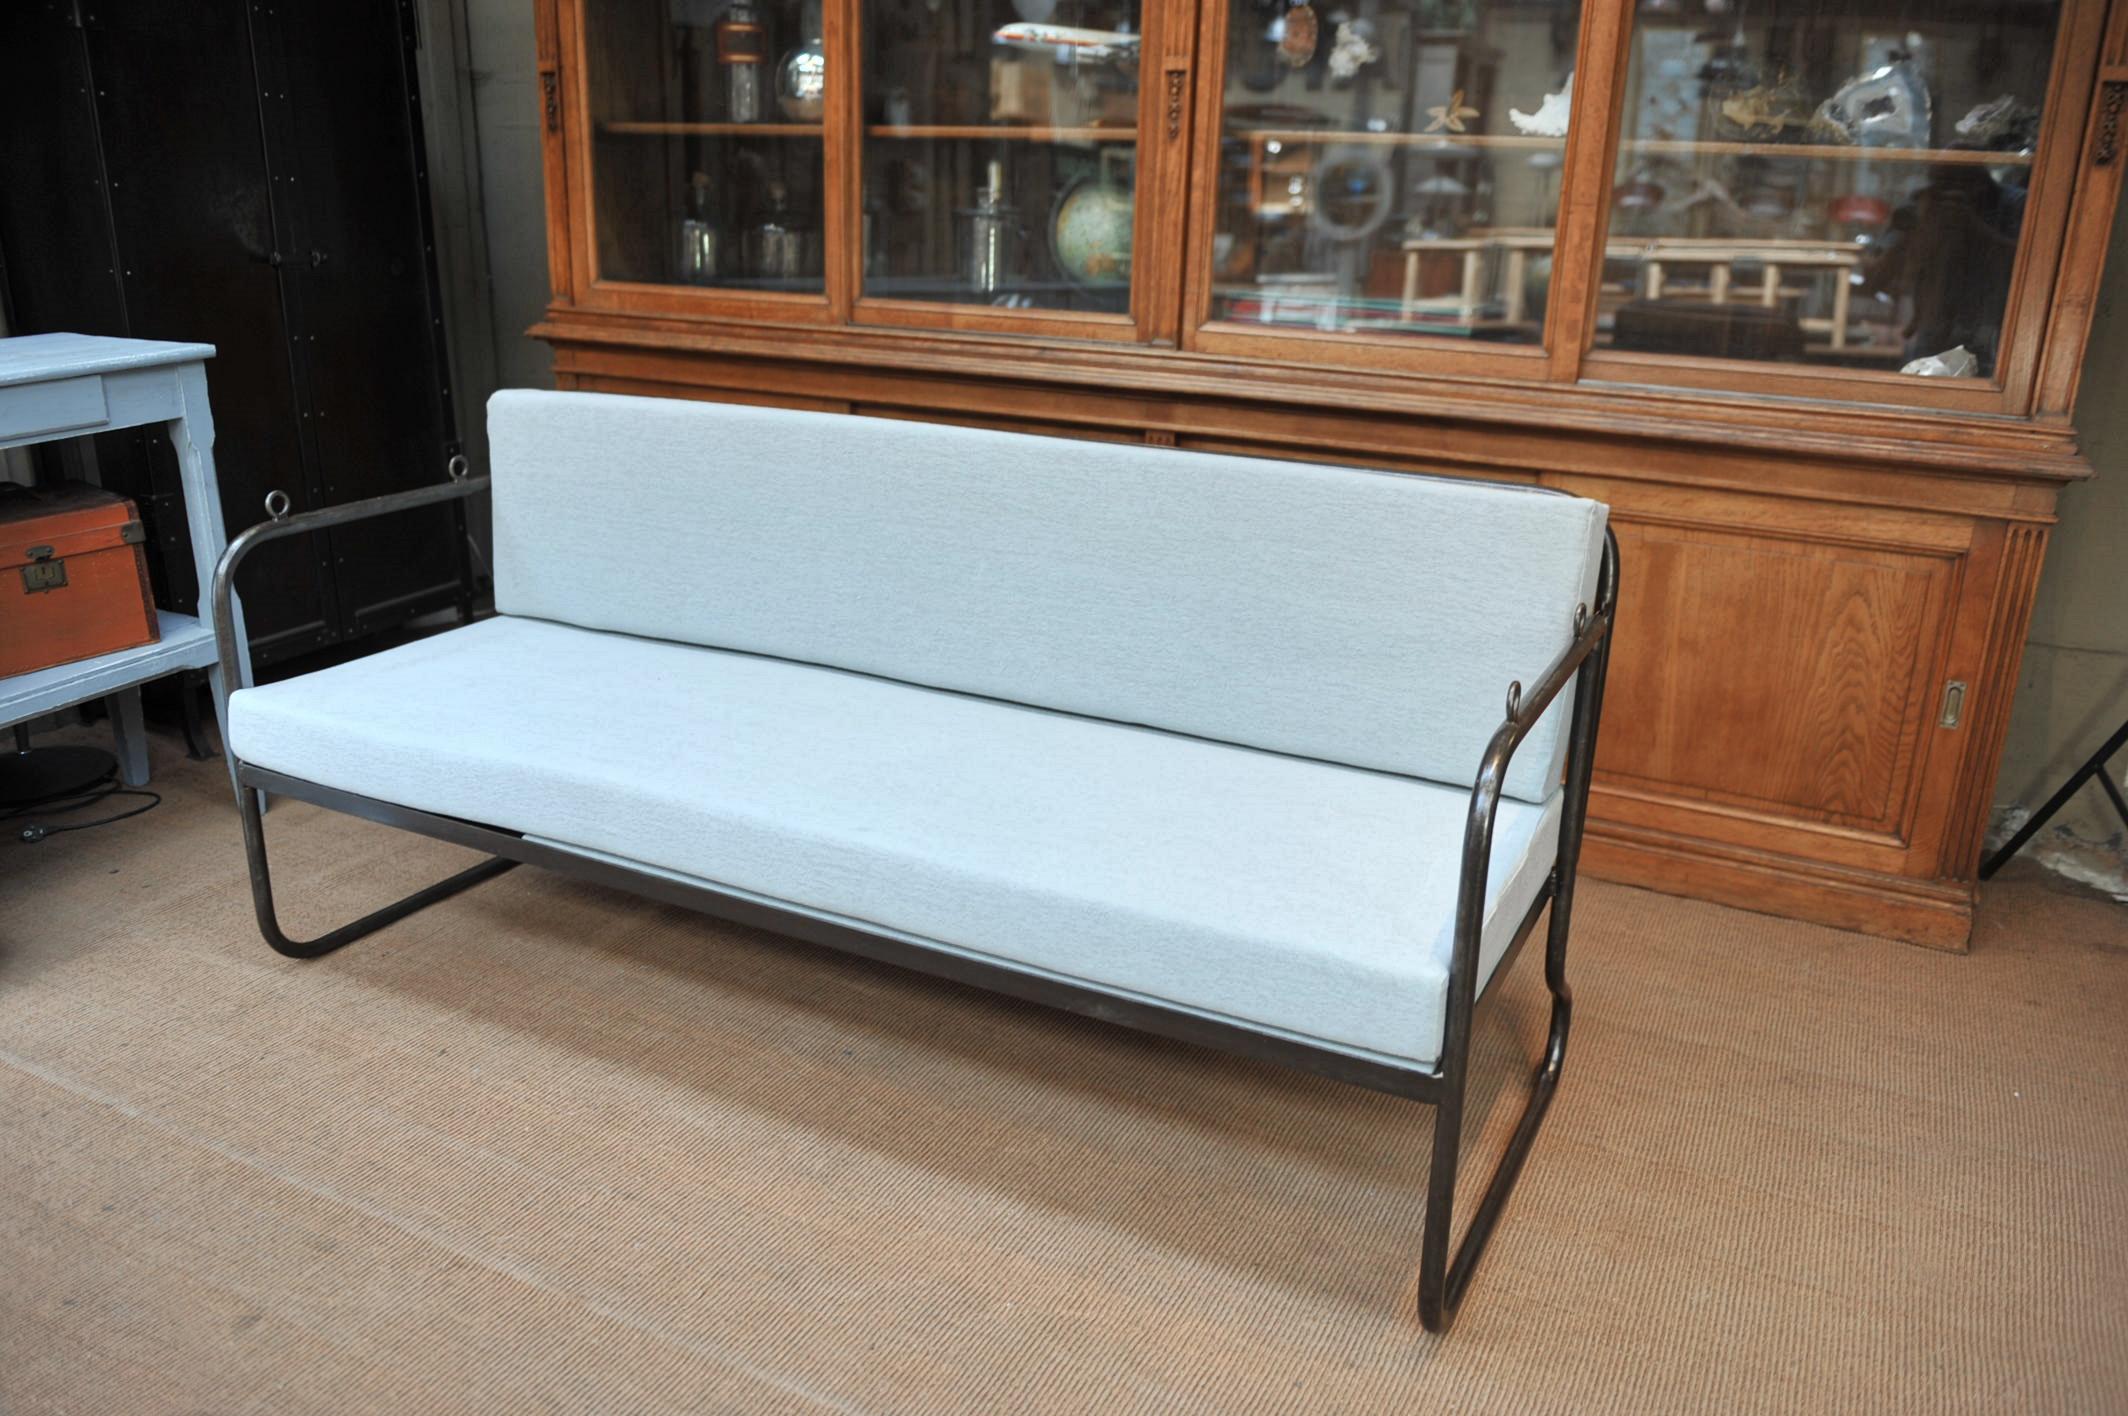 1920s mesh iron French garden sofa or daybed (polished and varnished for inside use) with double folding system : Folding left seat part with three bed positions and back adjustable from vertical to almost horizontal position by two little chains.